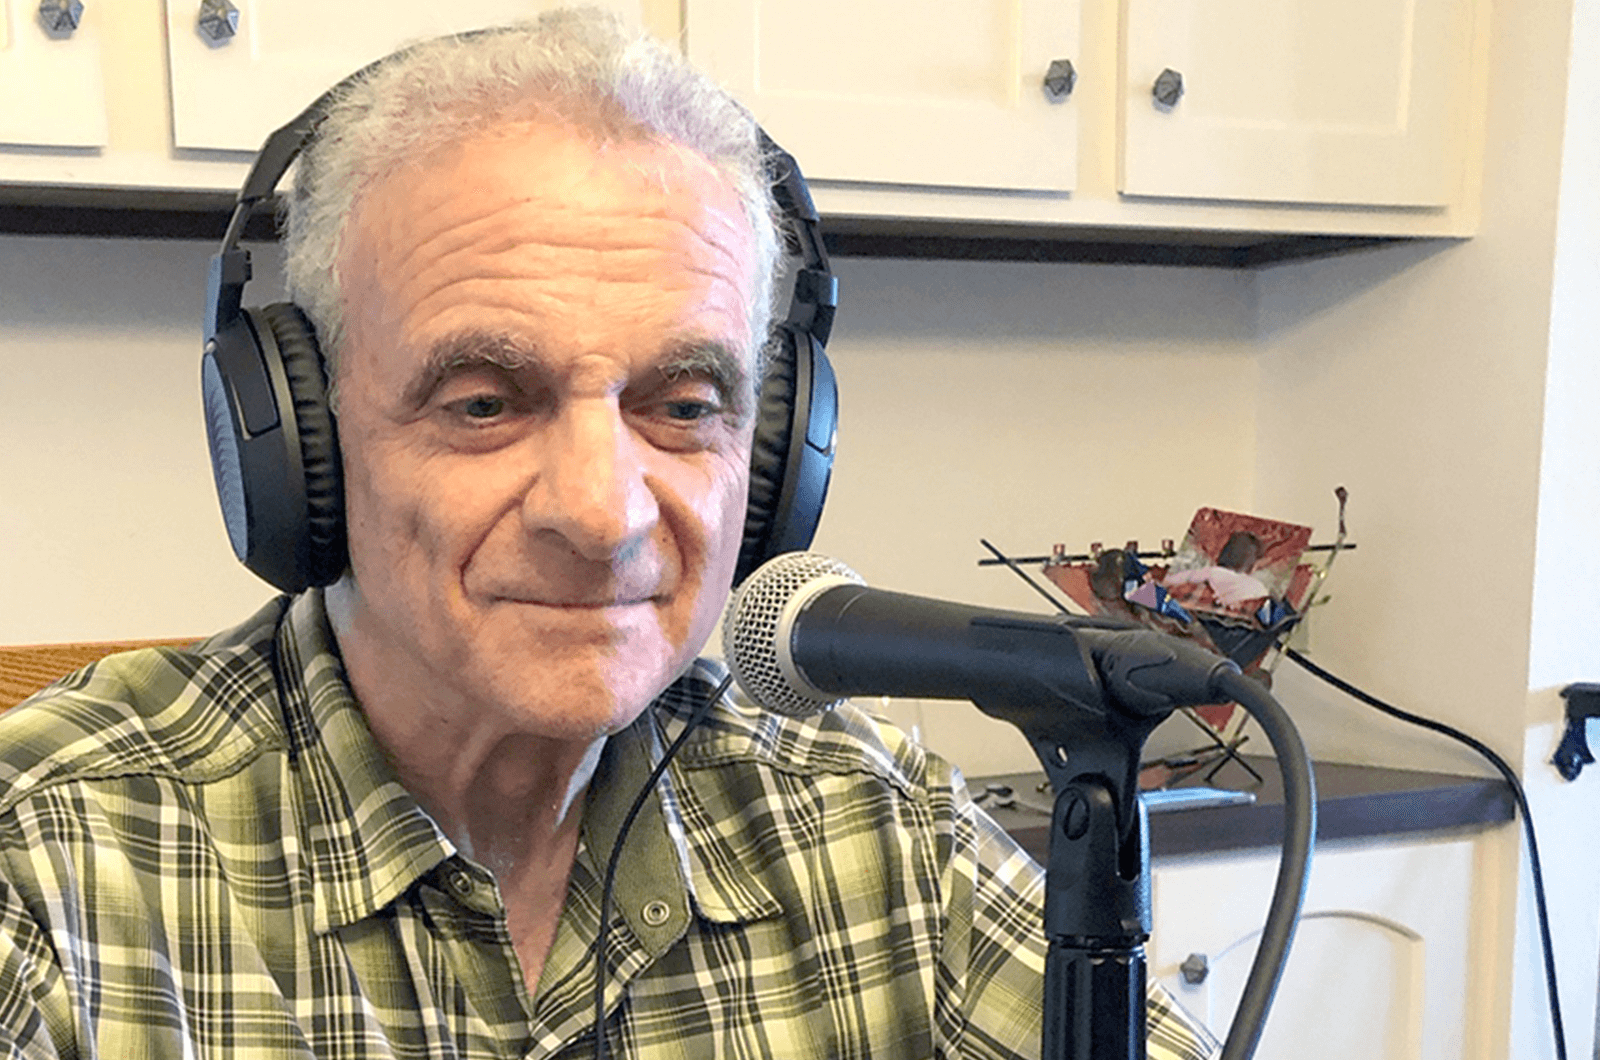 Man wearing headphones with microphone on table